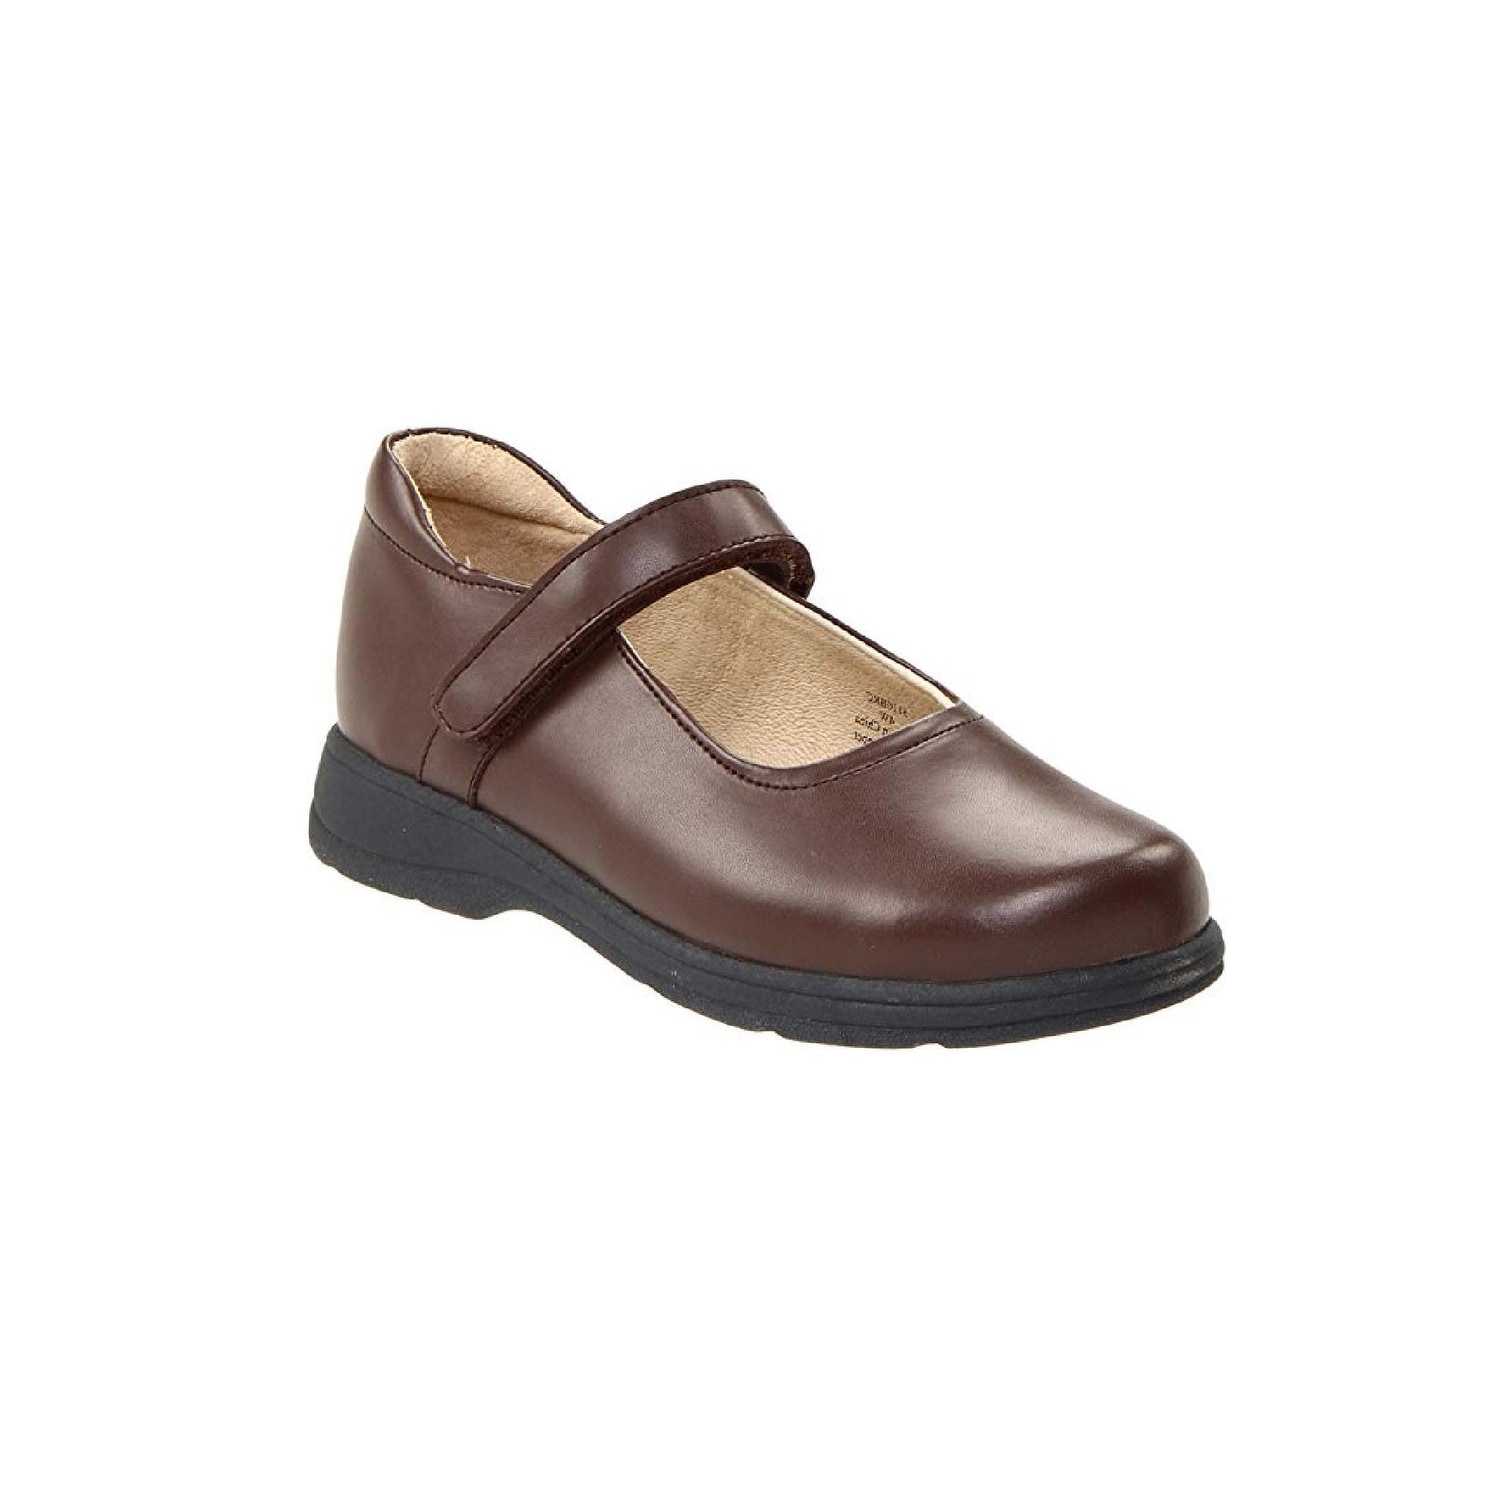 wide fitting school shoes